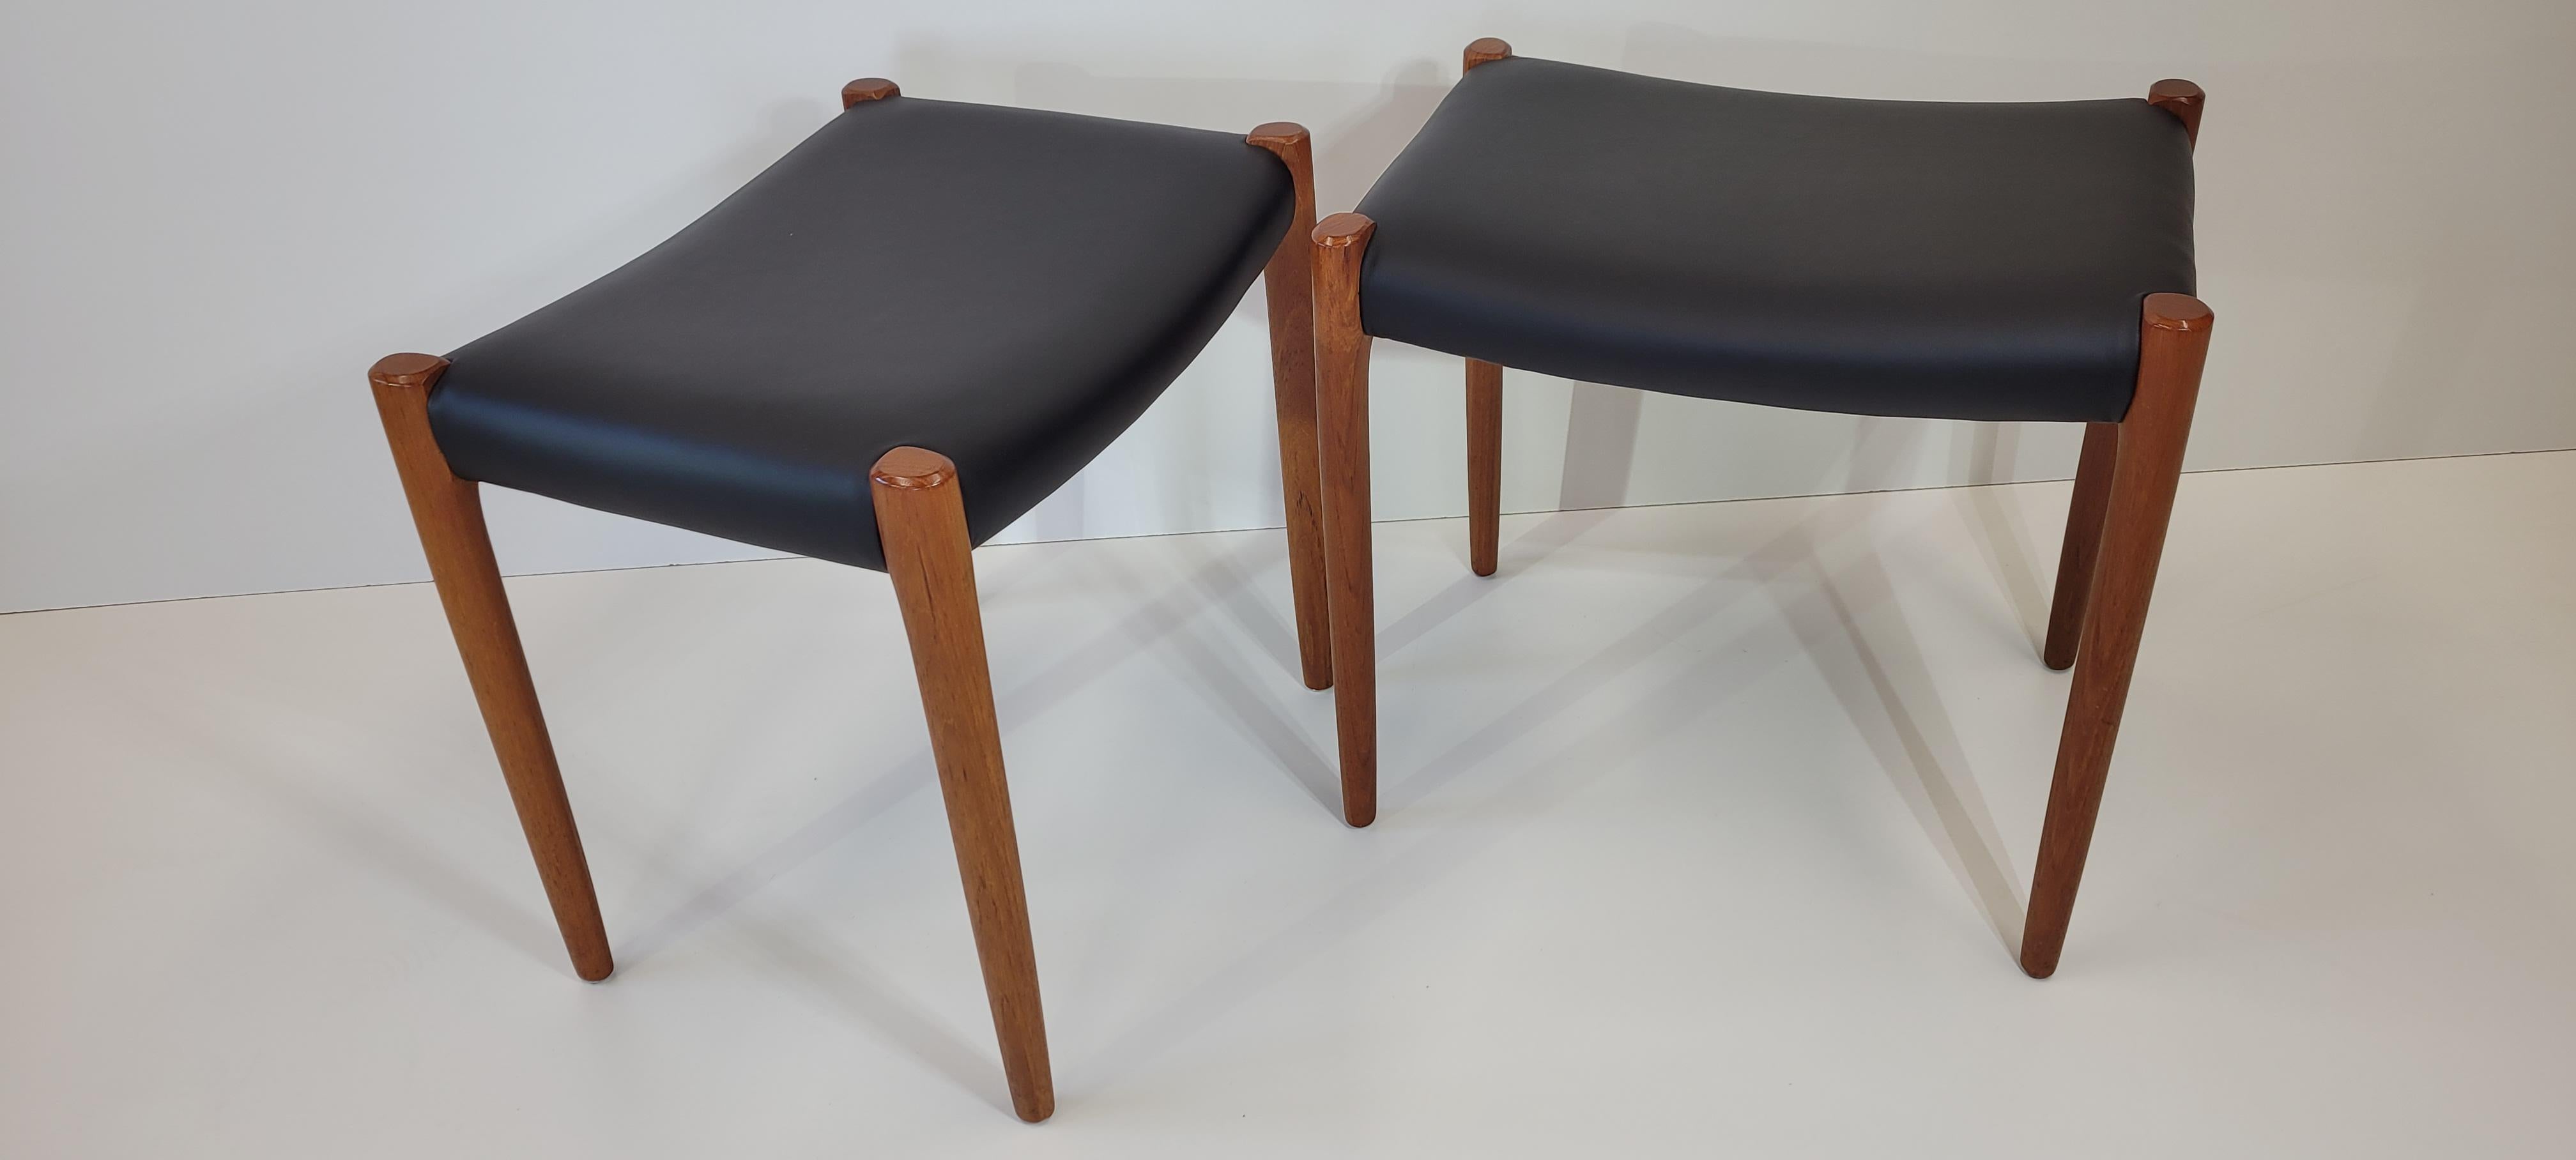 20th Century Pair of Model 80A Stool in Teak with Black Leather Seat by Niels Otto Møller